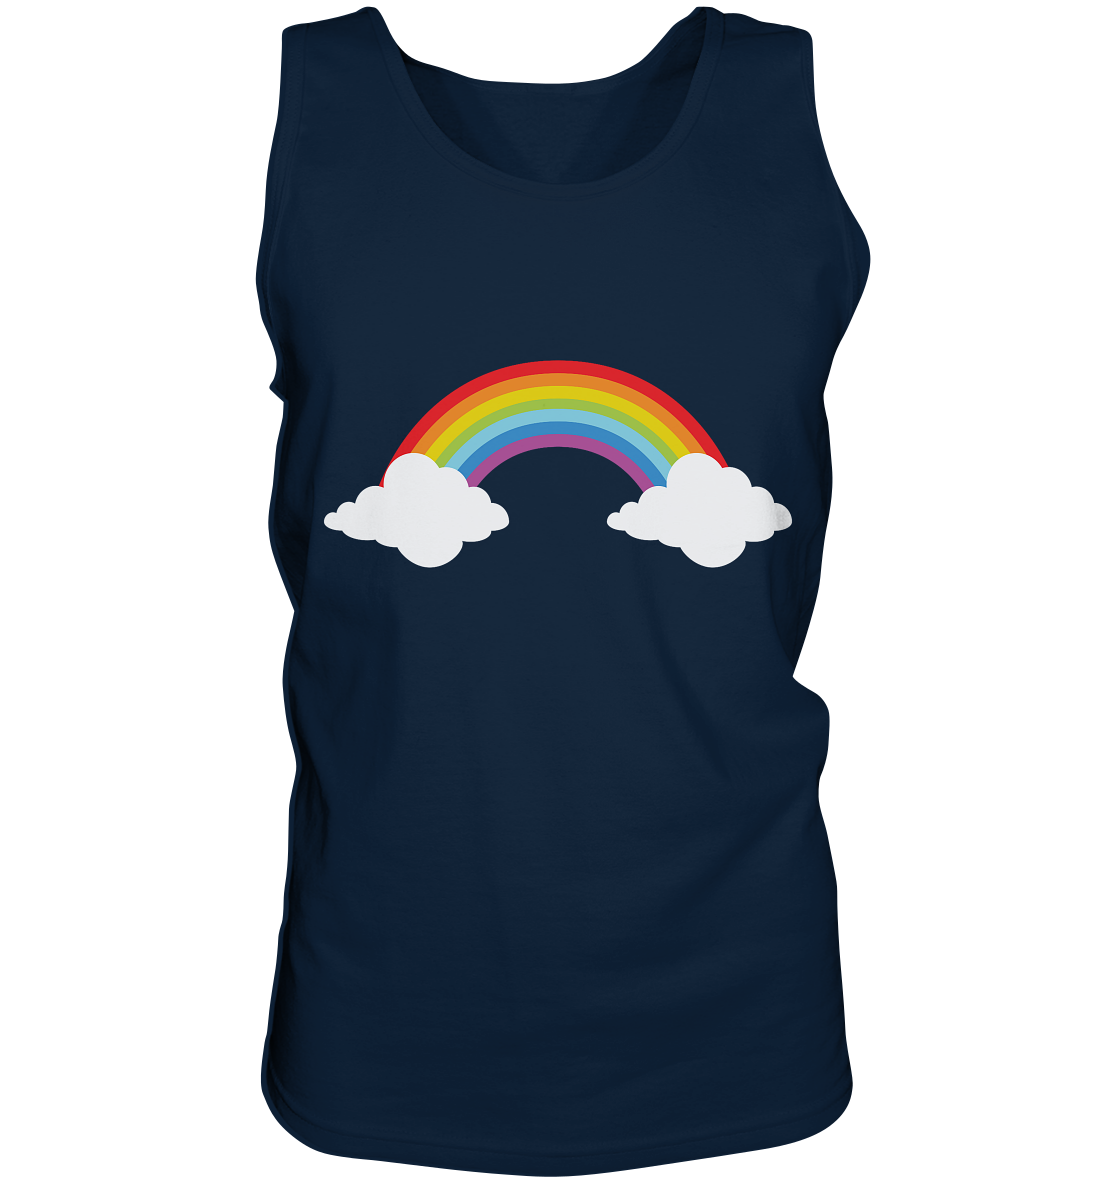 Rainbow with clouds - tank top